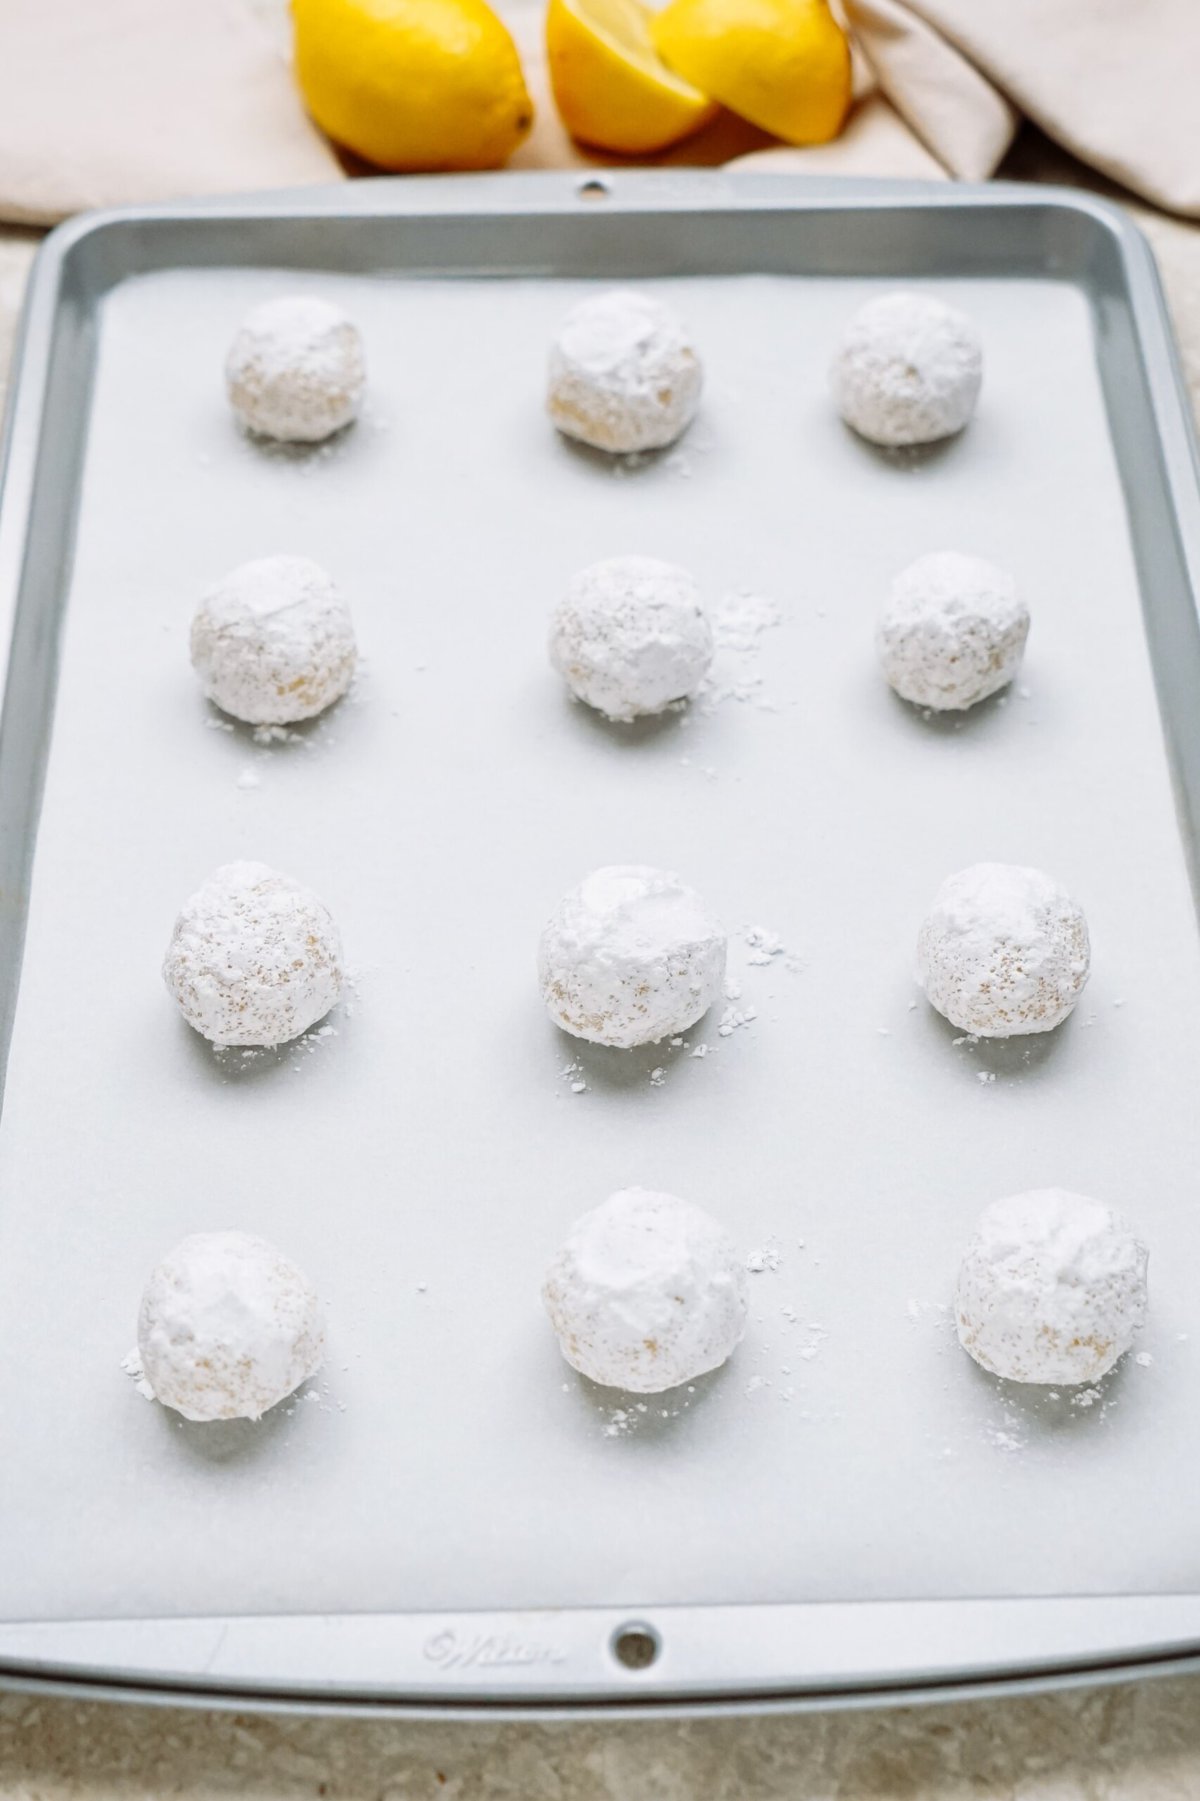 A baking sheet with powdered sugar-dusted cookie dough balls ready for baking.